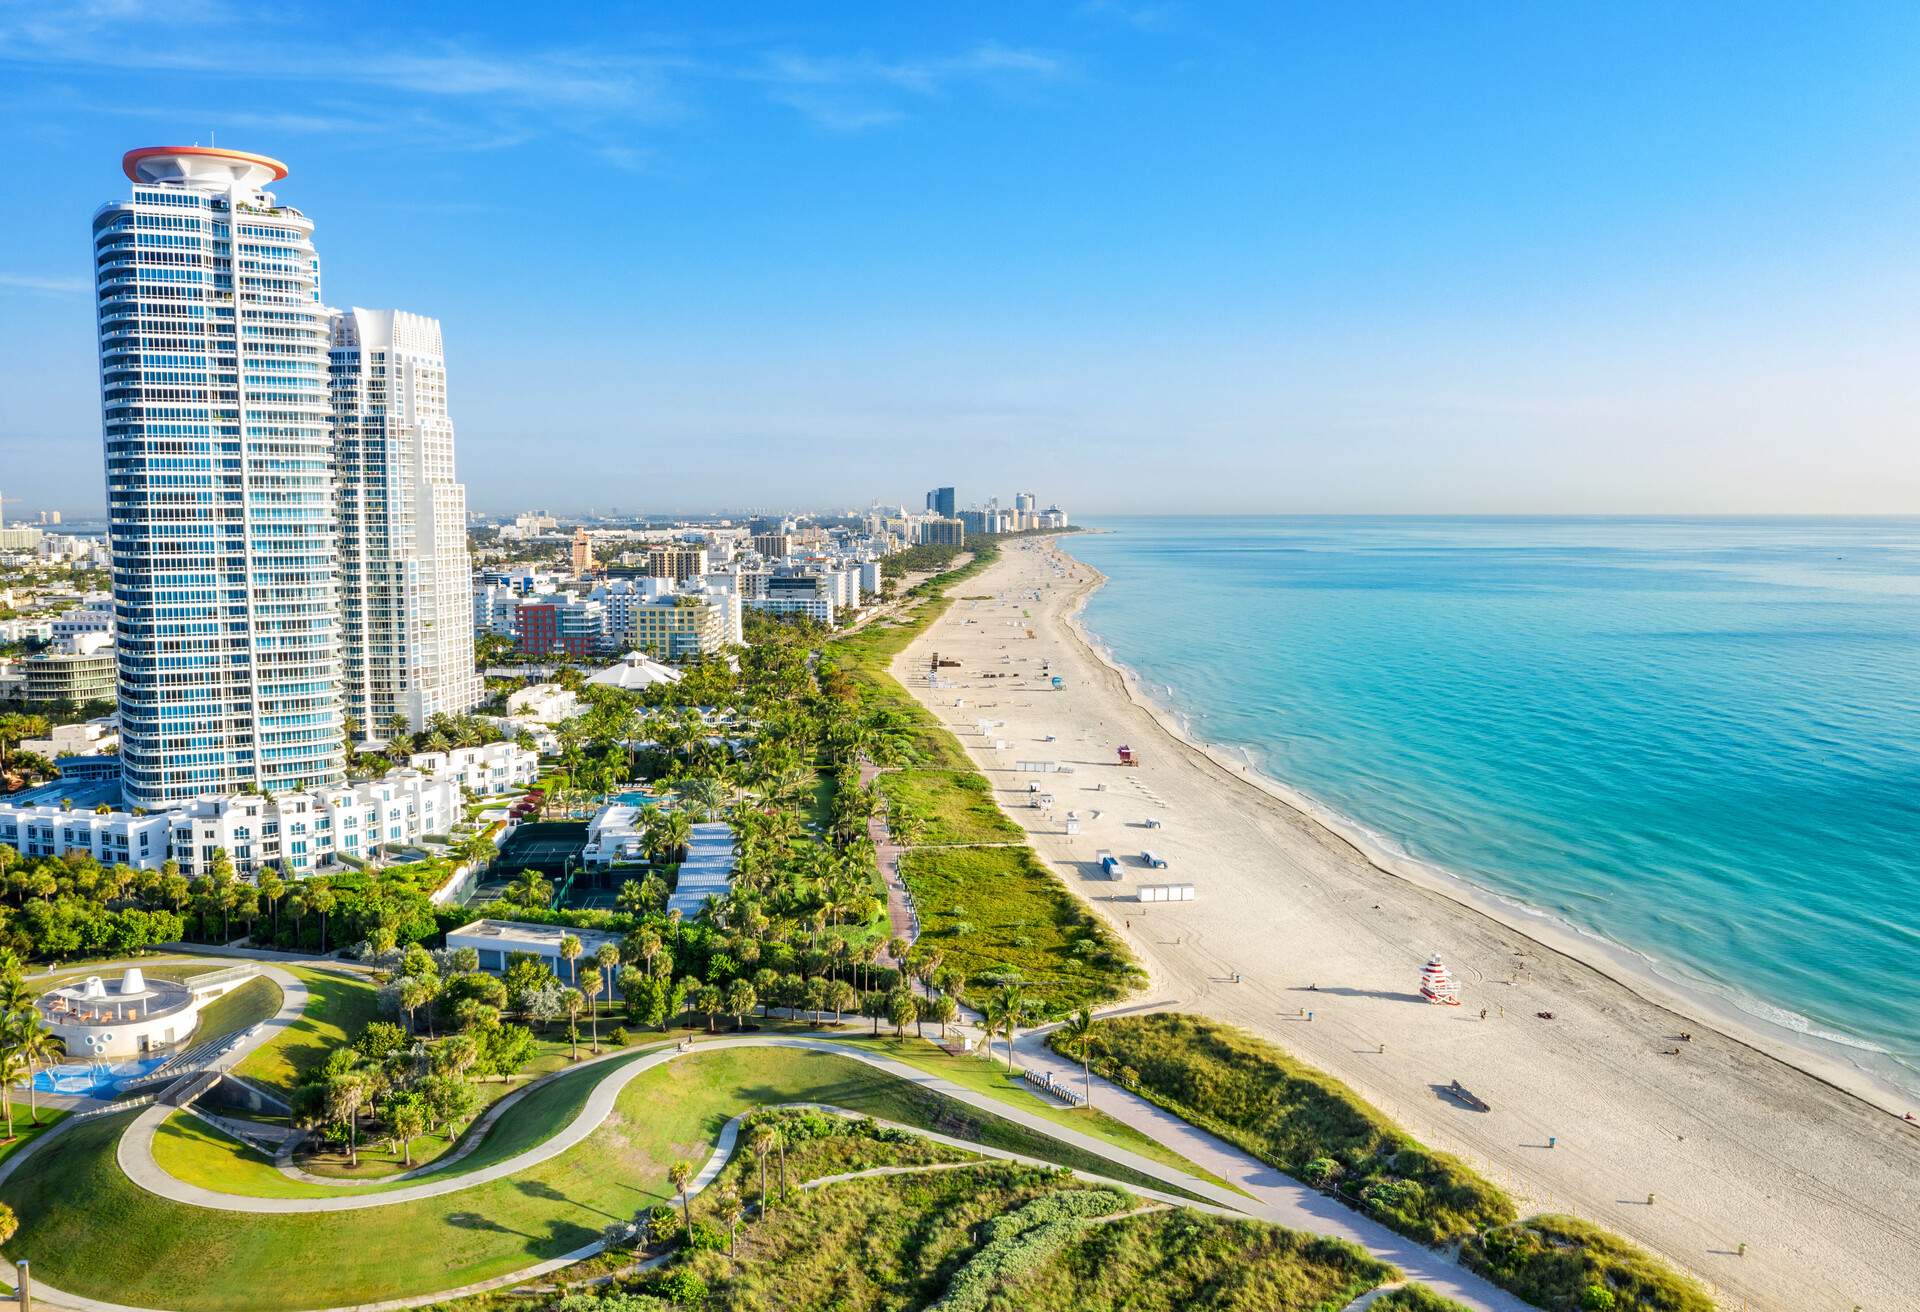 Panoramic high view of South Beach at Miami South Pointe Park with high skyscrapers and a blue sunny summer sky, Florida, USA